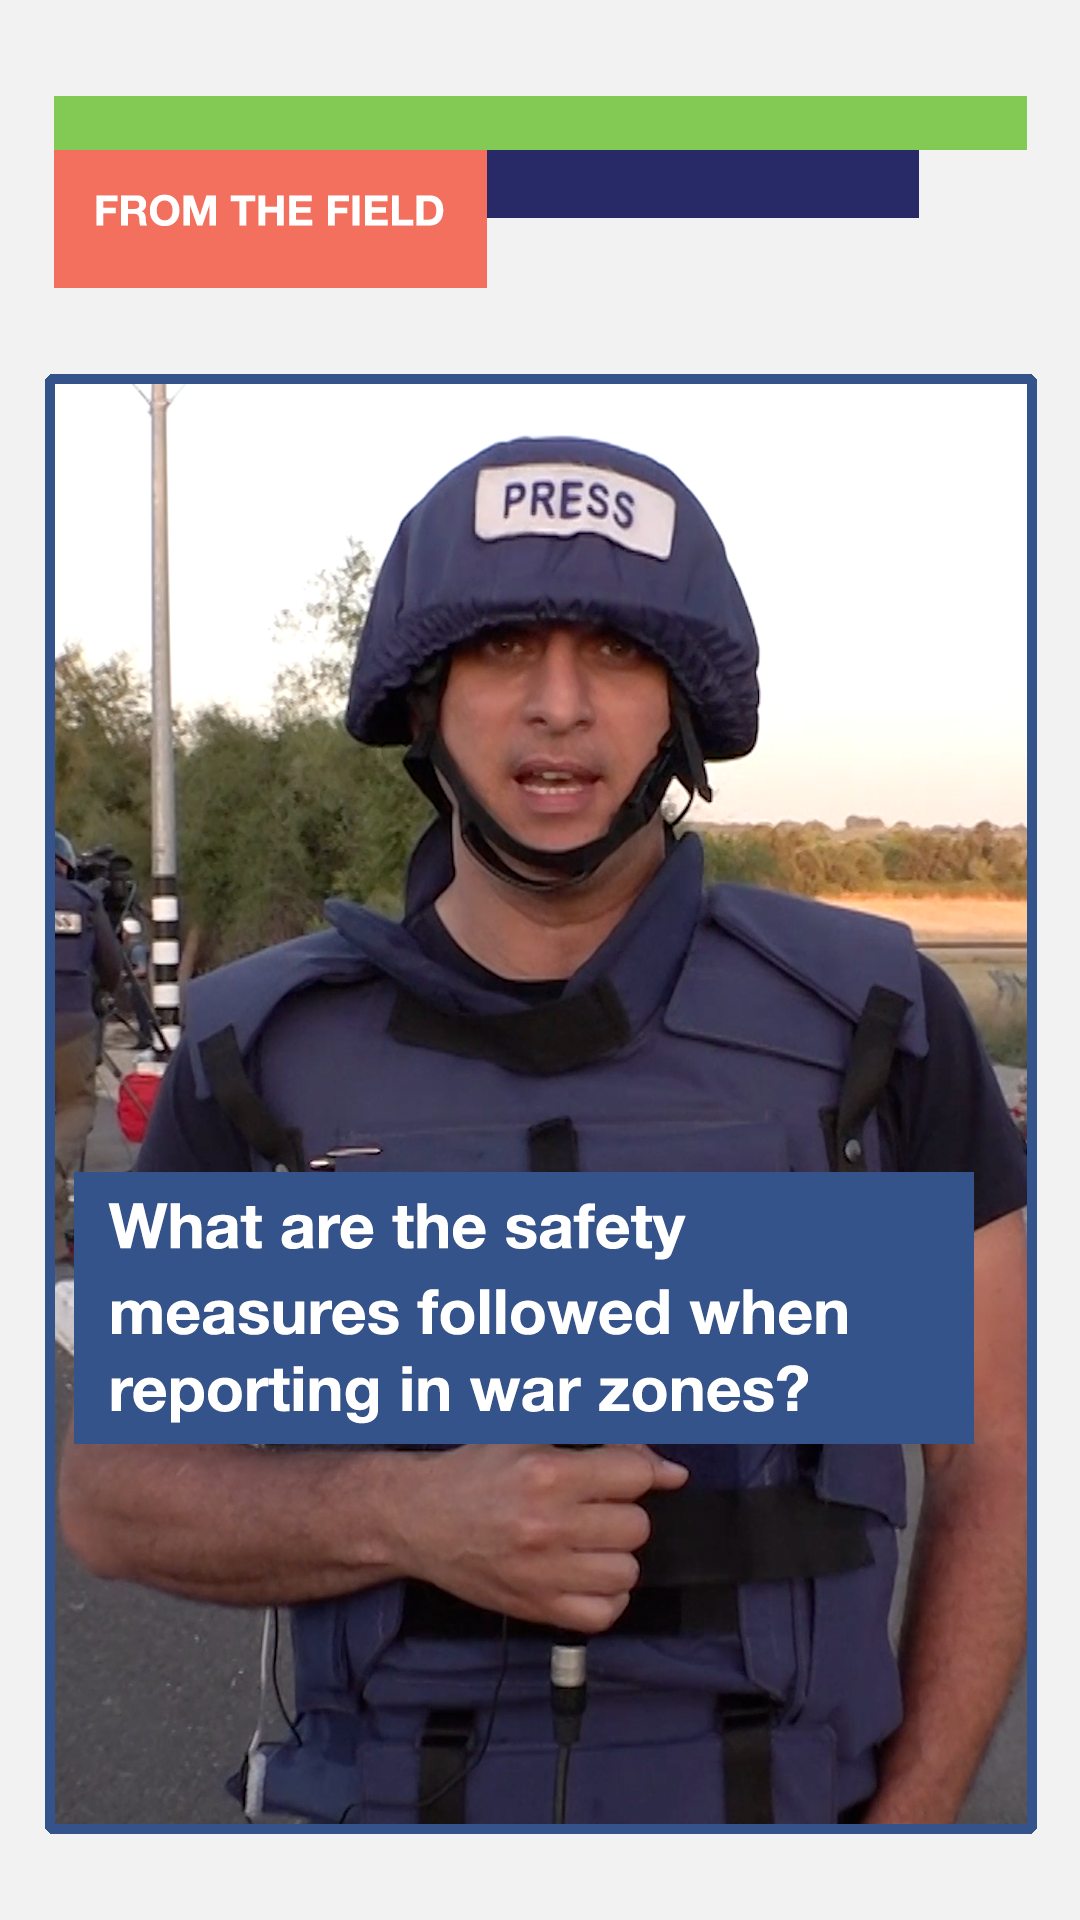 What are the safety measures followed when reporting in war zones?